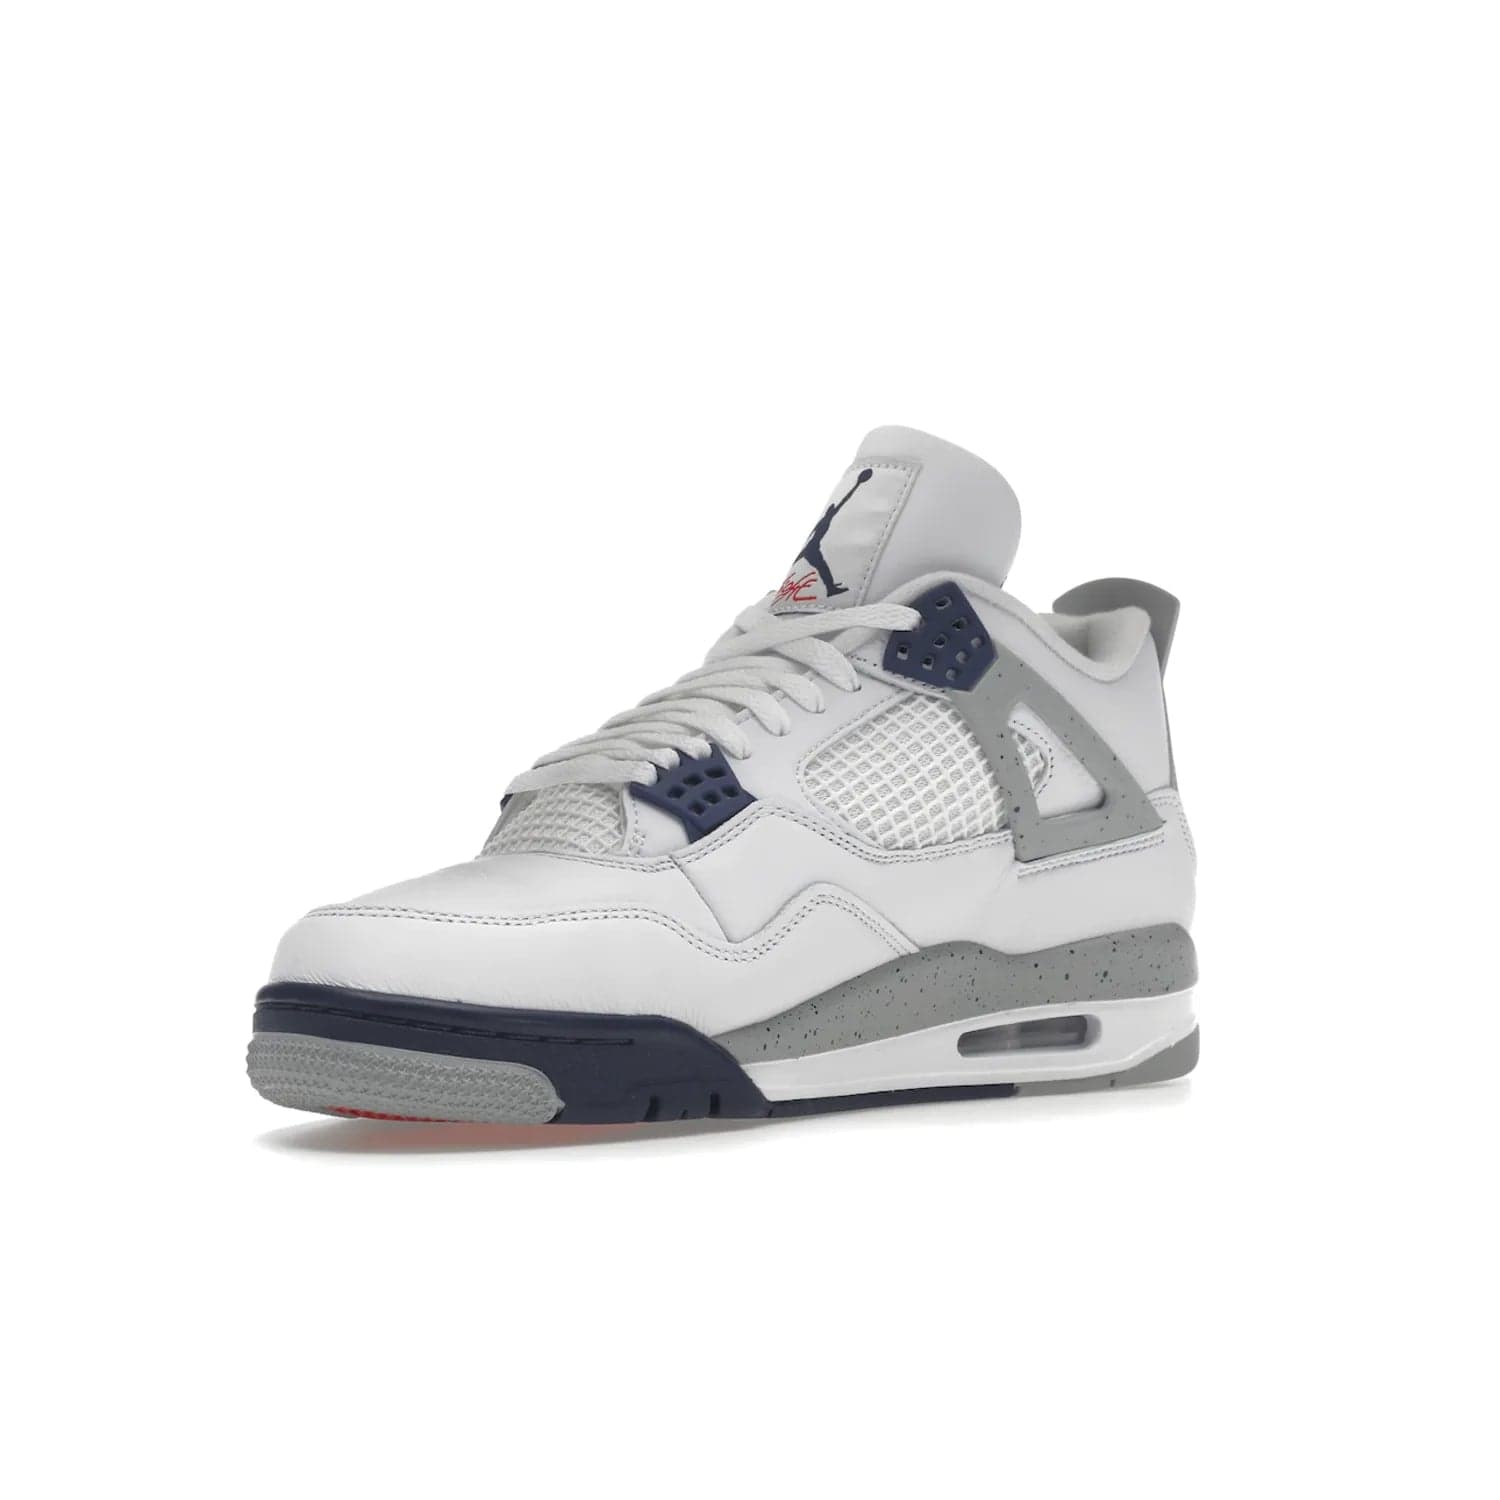 Jordan 4 Retro Midnight Navy - Image 15 - Only at www.BallersClubKickz.com - Shop the Air Jordan Retro 4 White Midnight Navy. Stand out with a classic white leather upper, black support wings, midnight navy eyelets, and Crimson Jumpman tongue tag. Unbeatable comfort with two-tone polyurethane midsole with encapsulated Air technology. Get yours before October 29th, 2022.